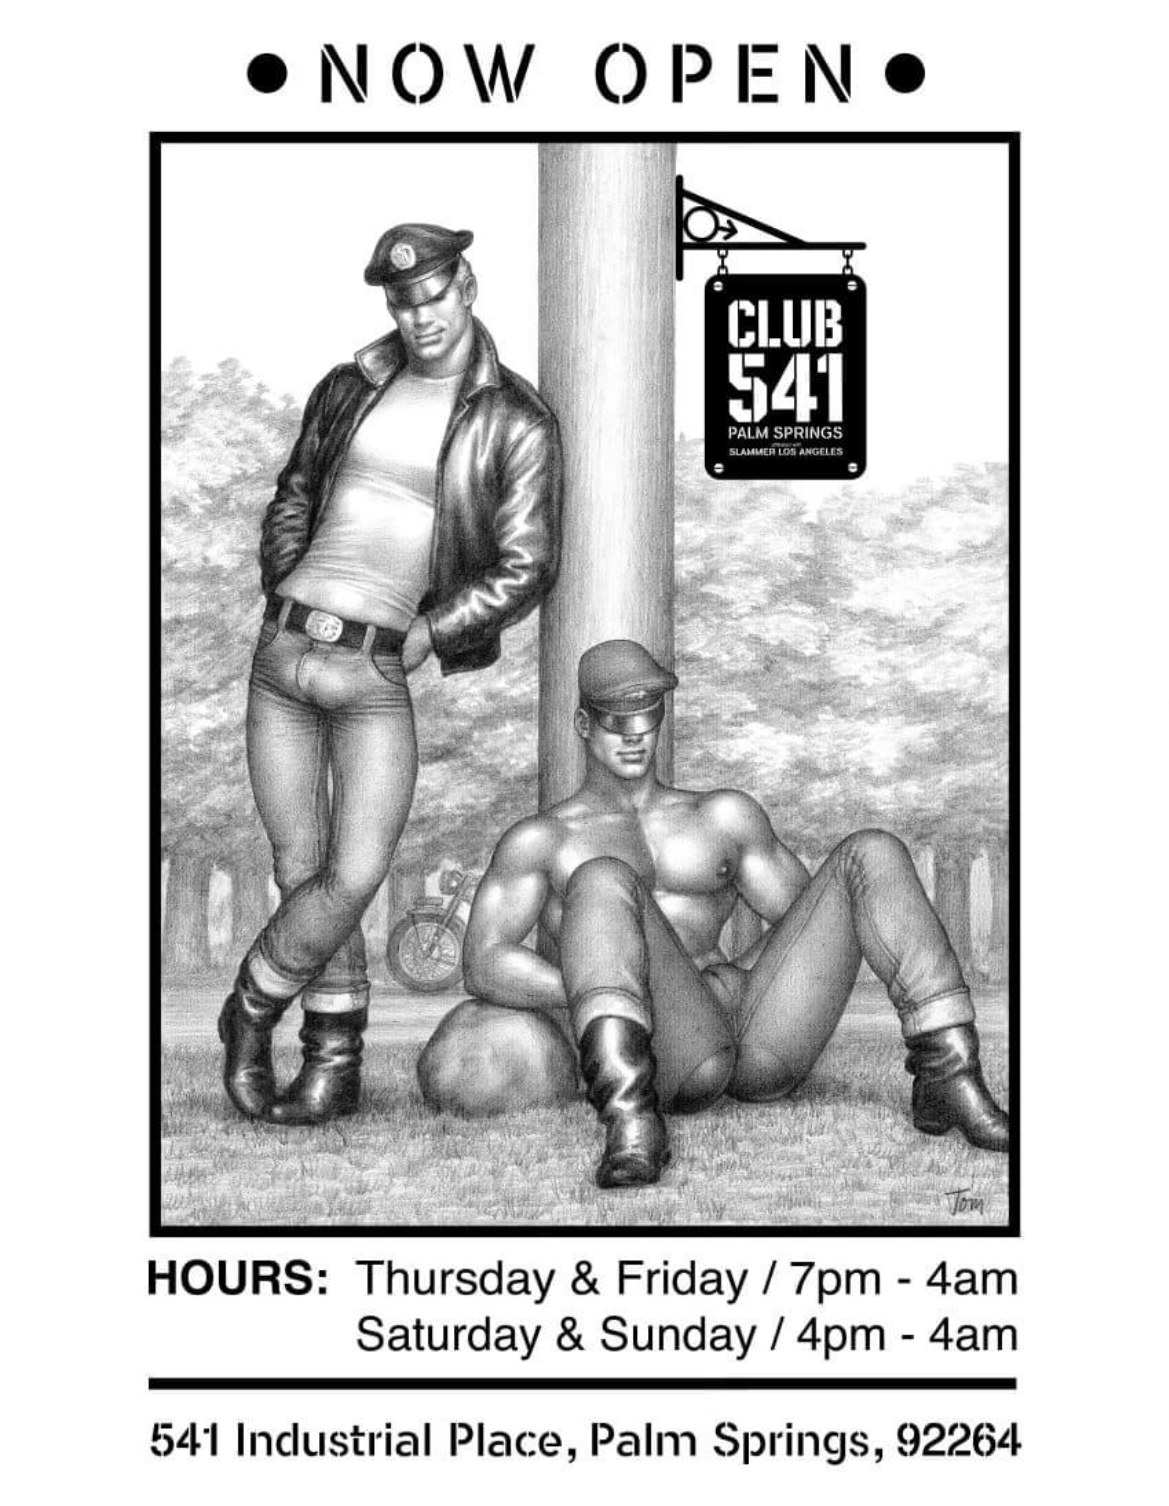 Palm springs sex clubs